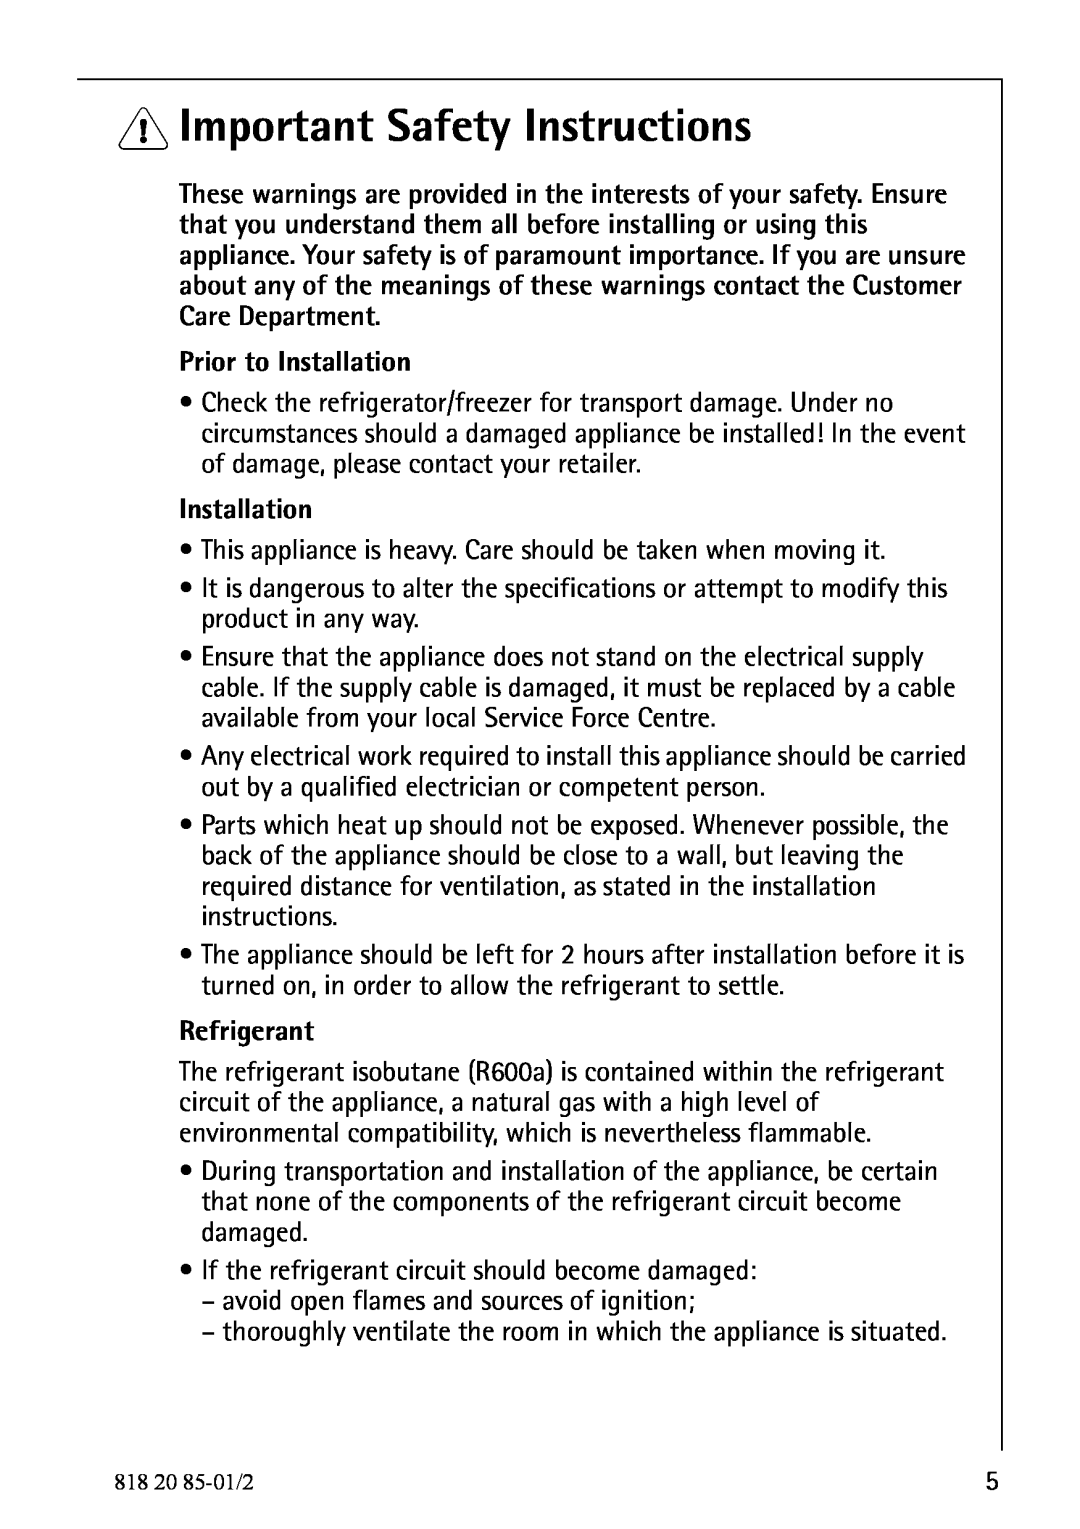 Electrolux 818 20 85 operating instructions Important Safety Instructions, Prior to Installation, Refrigerant 